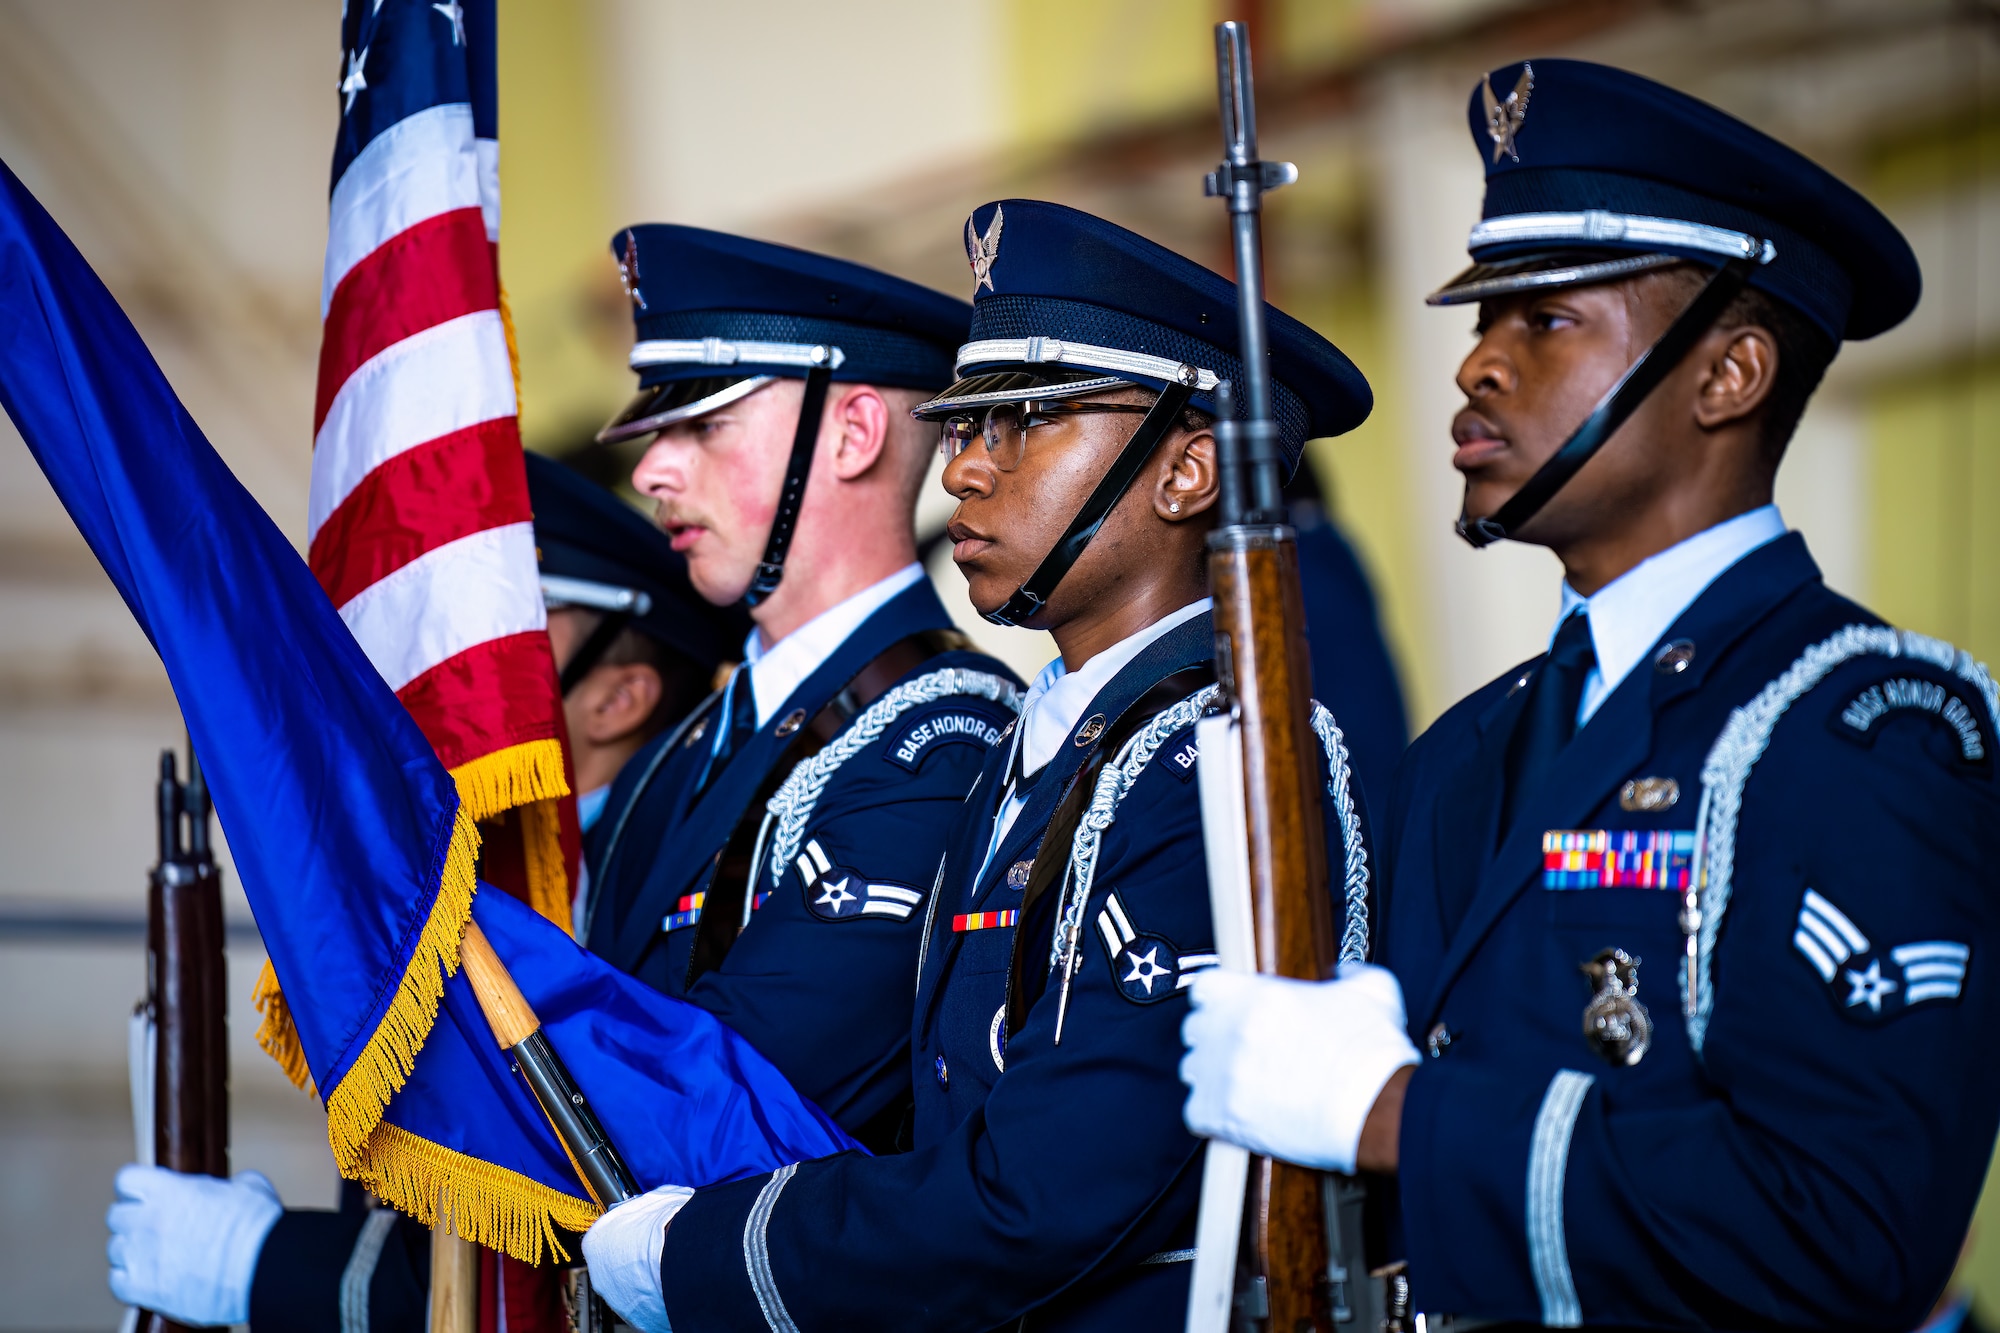 Members of the Kirtland Air Force Base Honor Guard stand at attention.